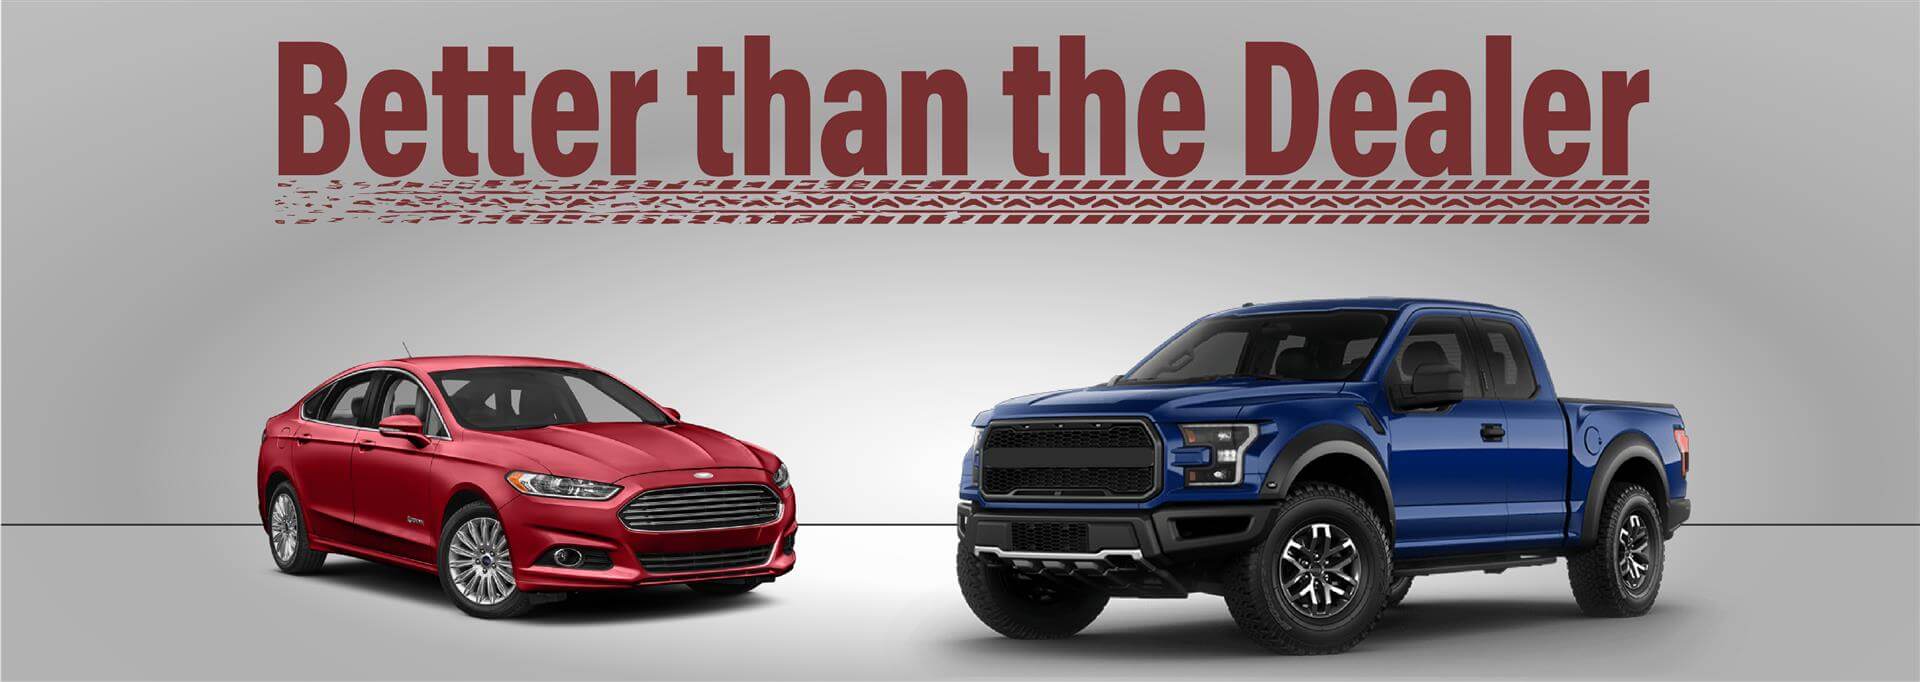 Ford fusion and ford F150 Raptor repair in South Ogden Utah - A.B. Hadley, Inc.